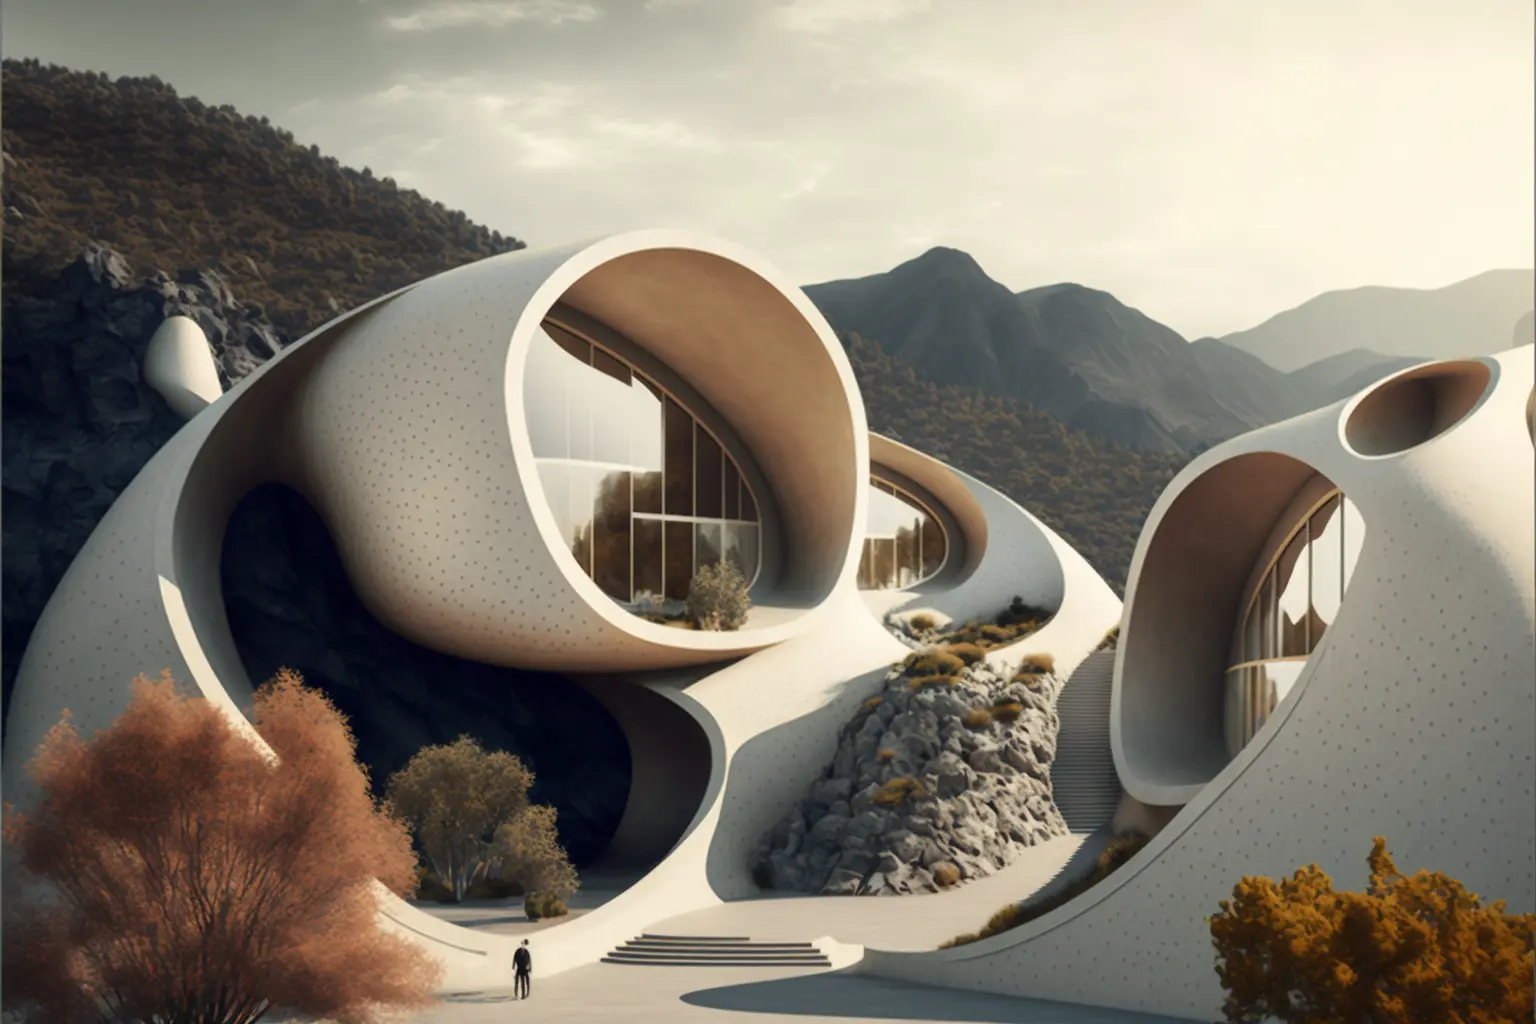 organic resort embed into a series of hills, designed by Ando Tadao, architectural photography, style of archillect, futurism, modernist architecture